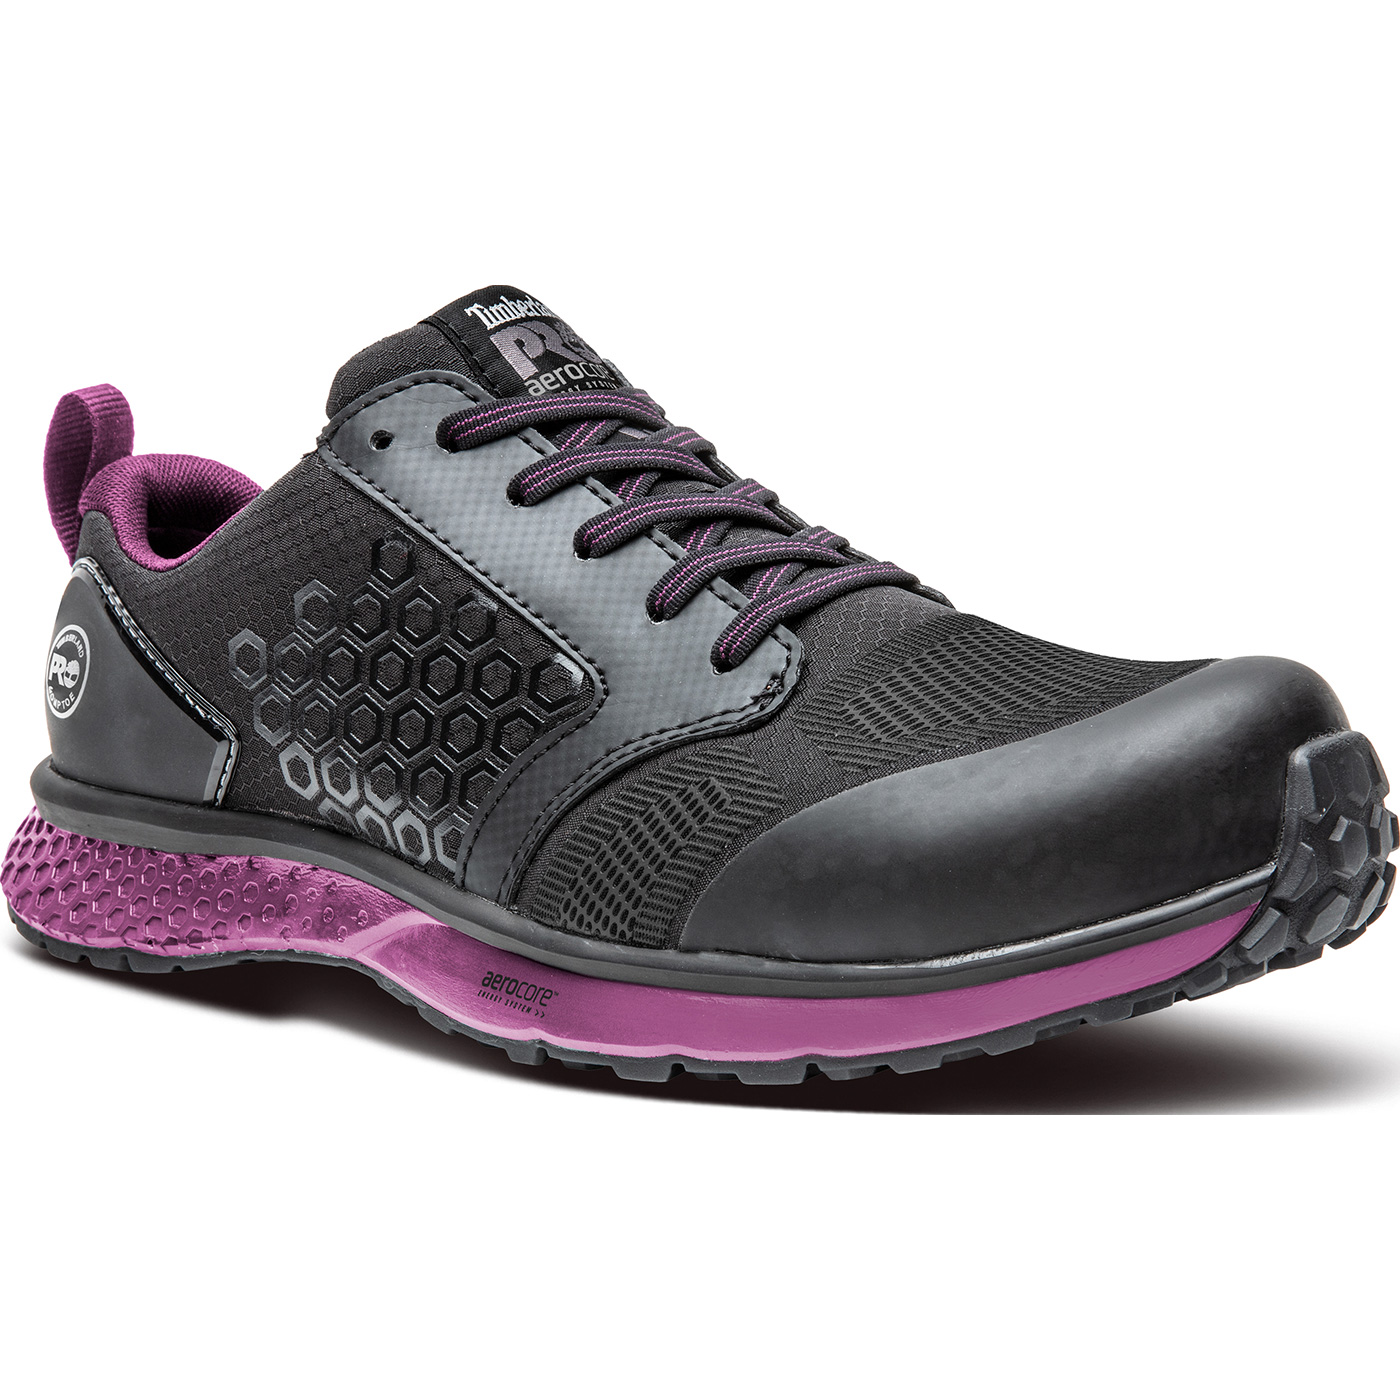  Timberland PRO Setra Composite Safety Toe Black/Pink 5.5 C (M)  : Clothing, Shoes & Jewelry